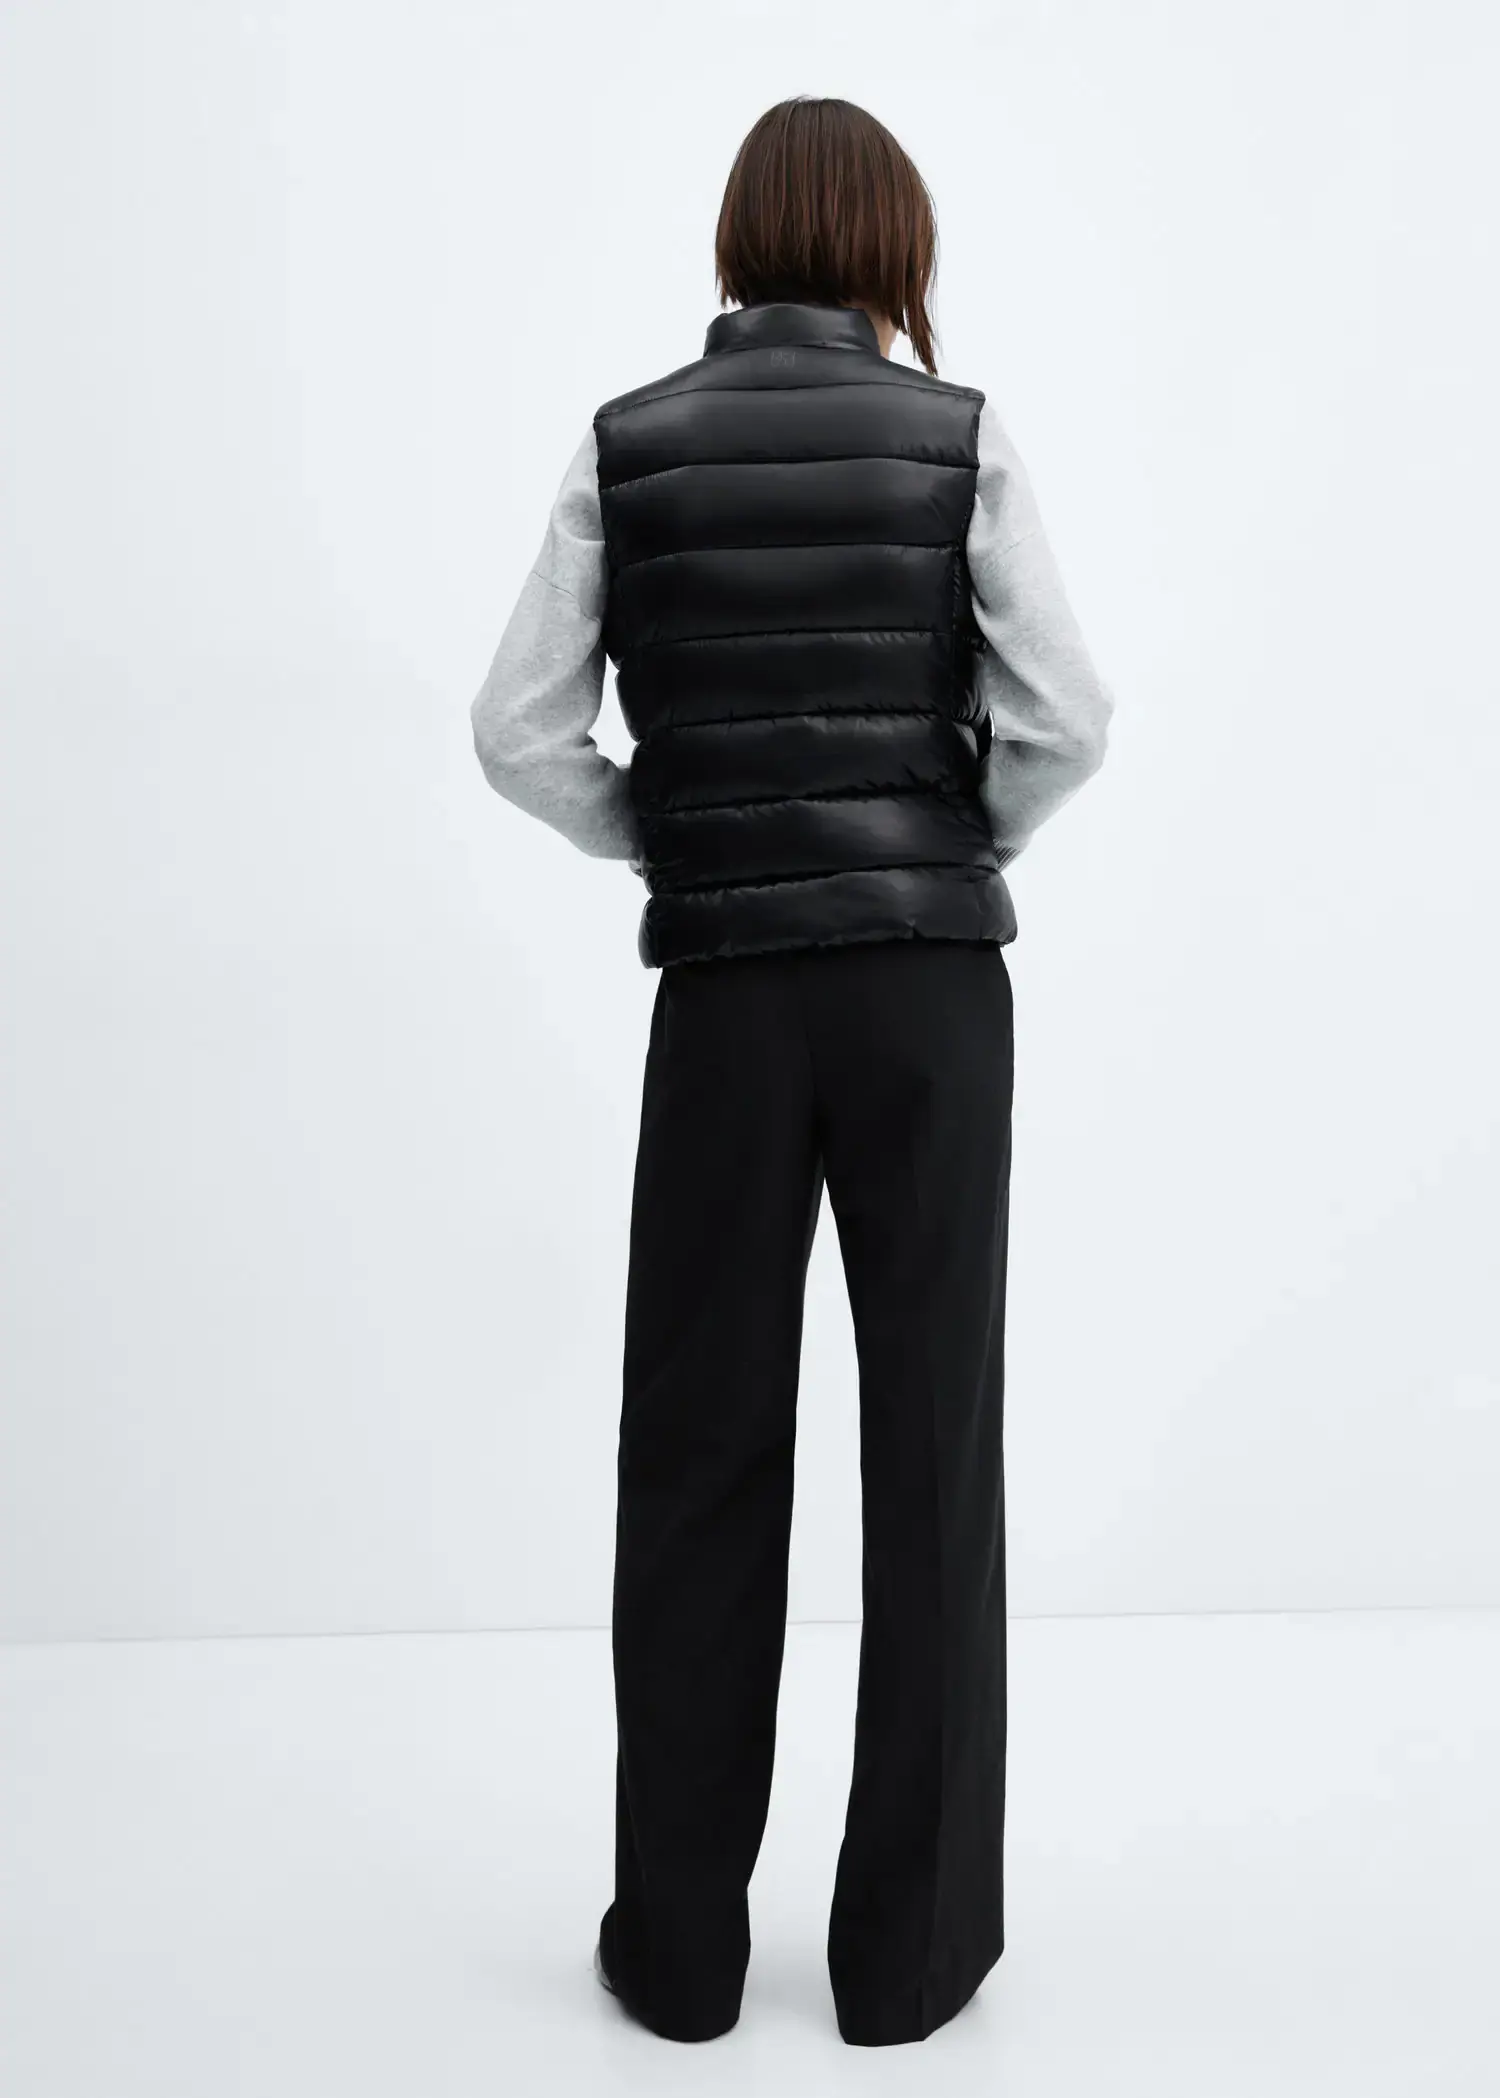 Mango Ultra-light quilted gilet. 3